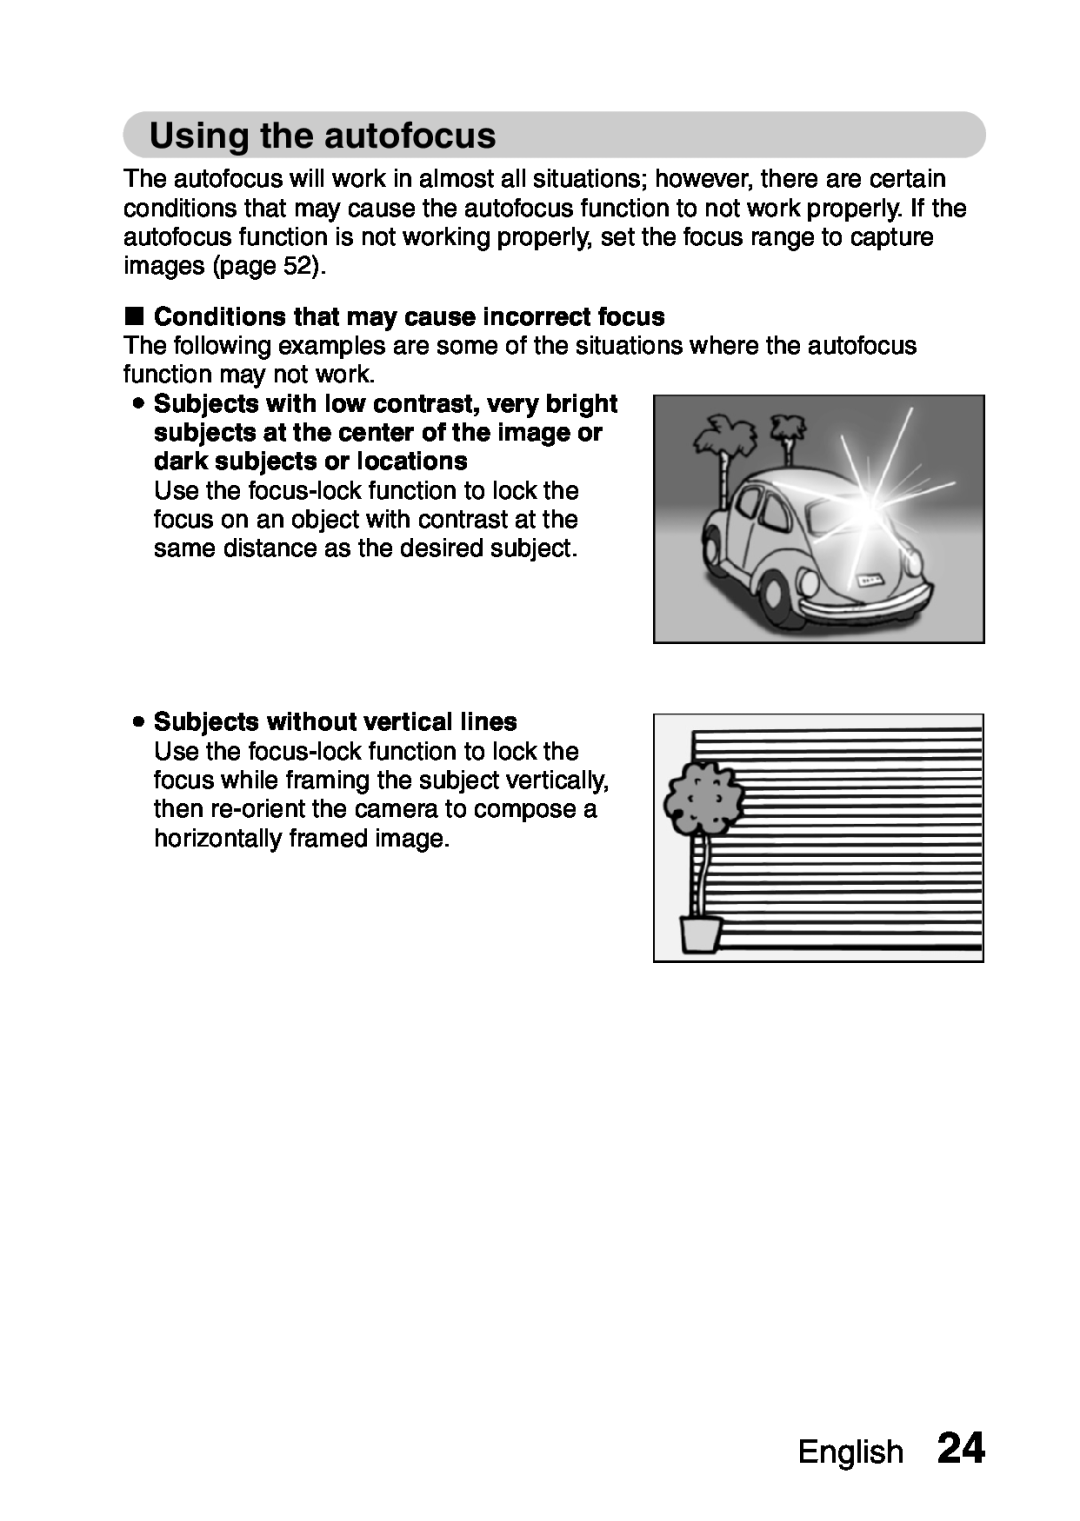 Sanyo VPC-S60 instruction manual Using the autofocus, k Conditions that may cause incorrect focus, English 